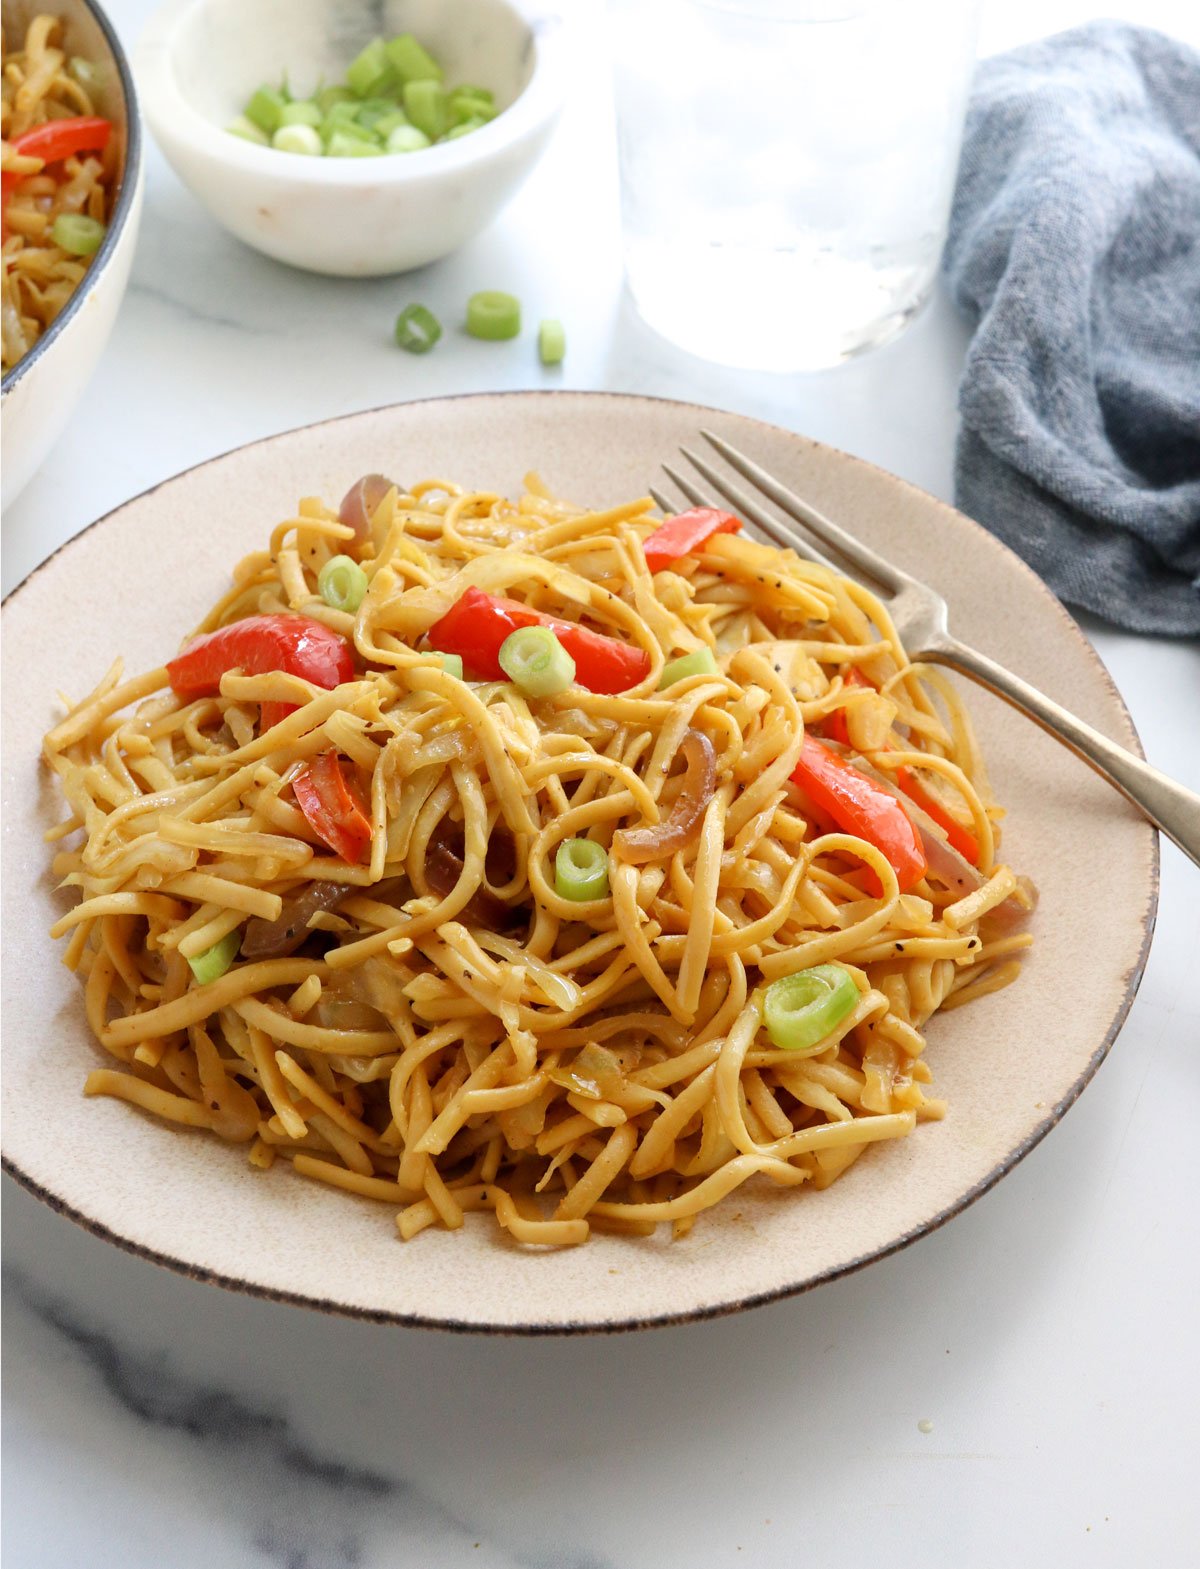 singapore noodles on plate with fork